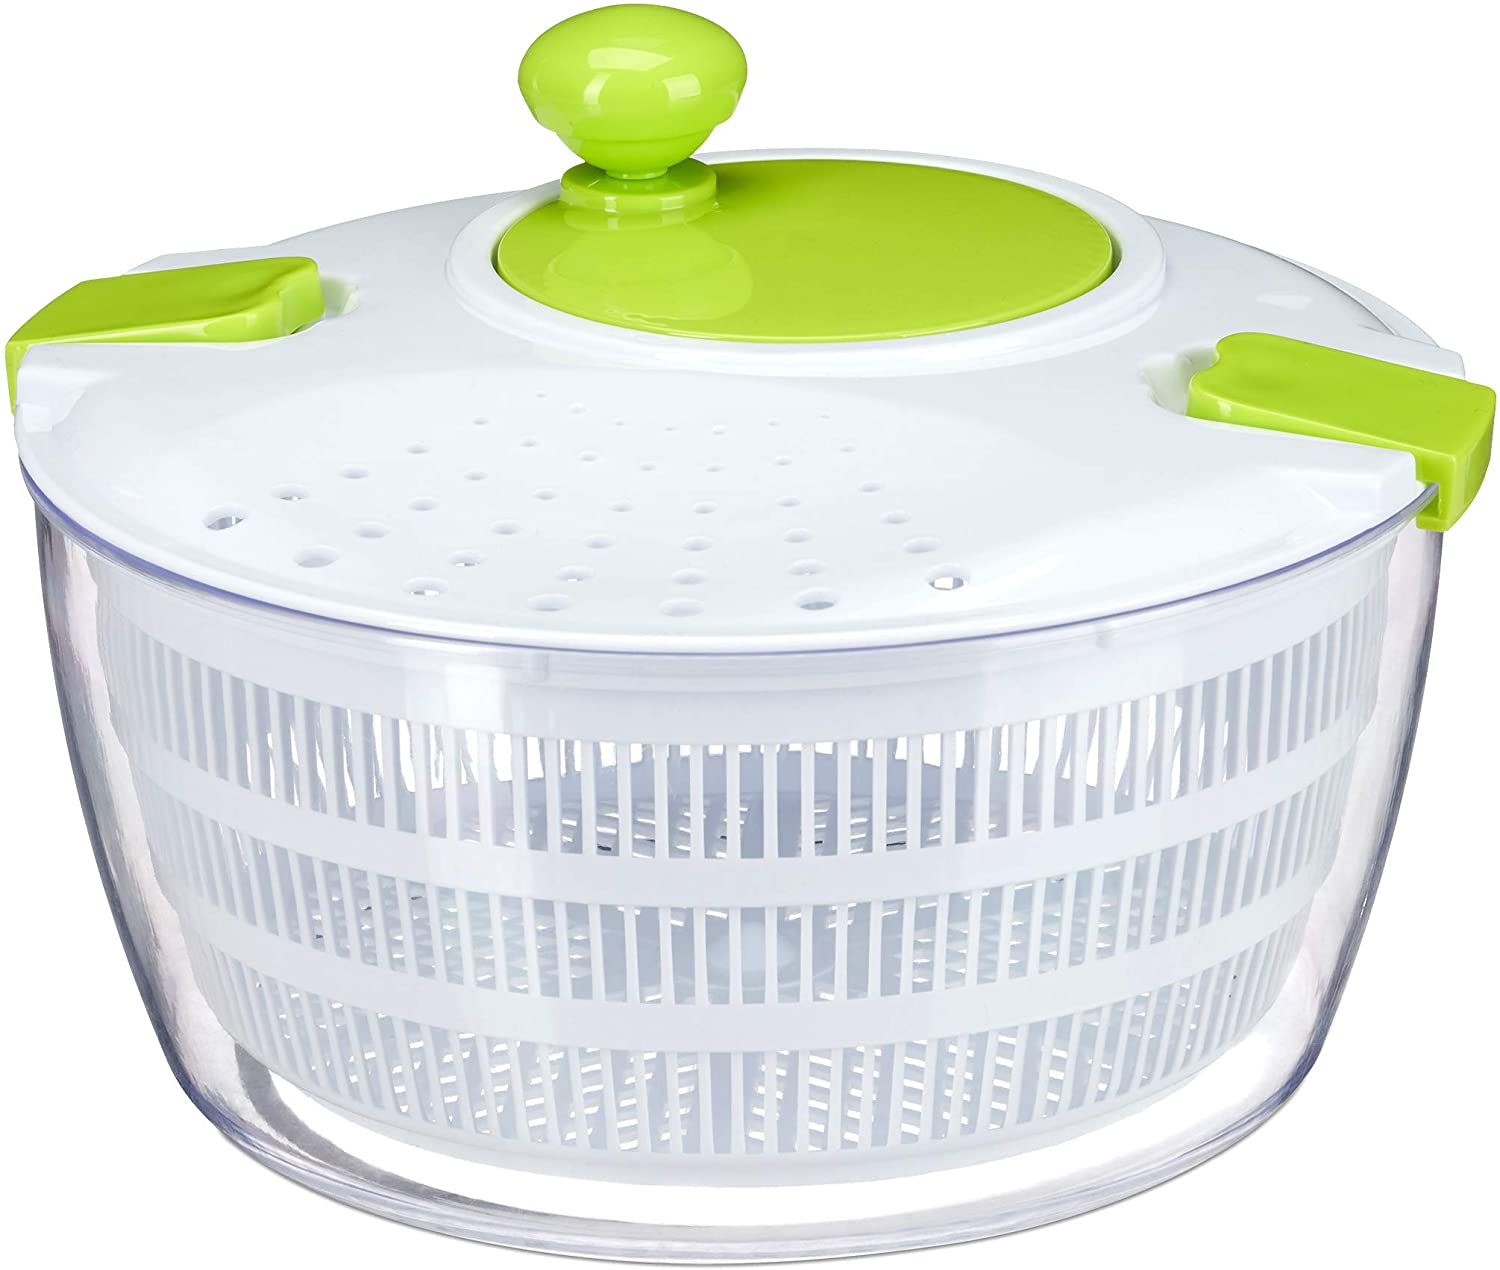 Relaxdays Salad Spinner for Cranking, Professional Salad Spinner, Large Salad Dryer, XL Salad Carousel 5 Litres, White / Green